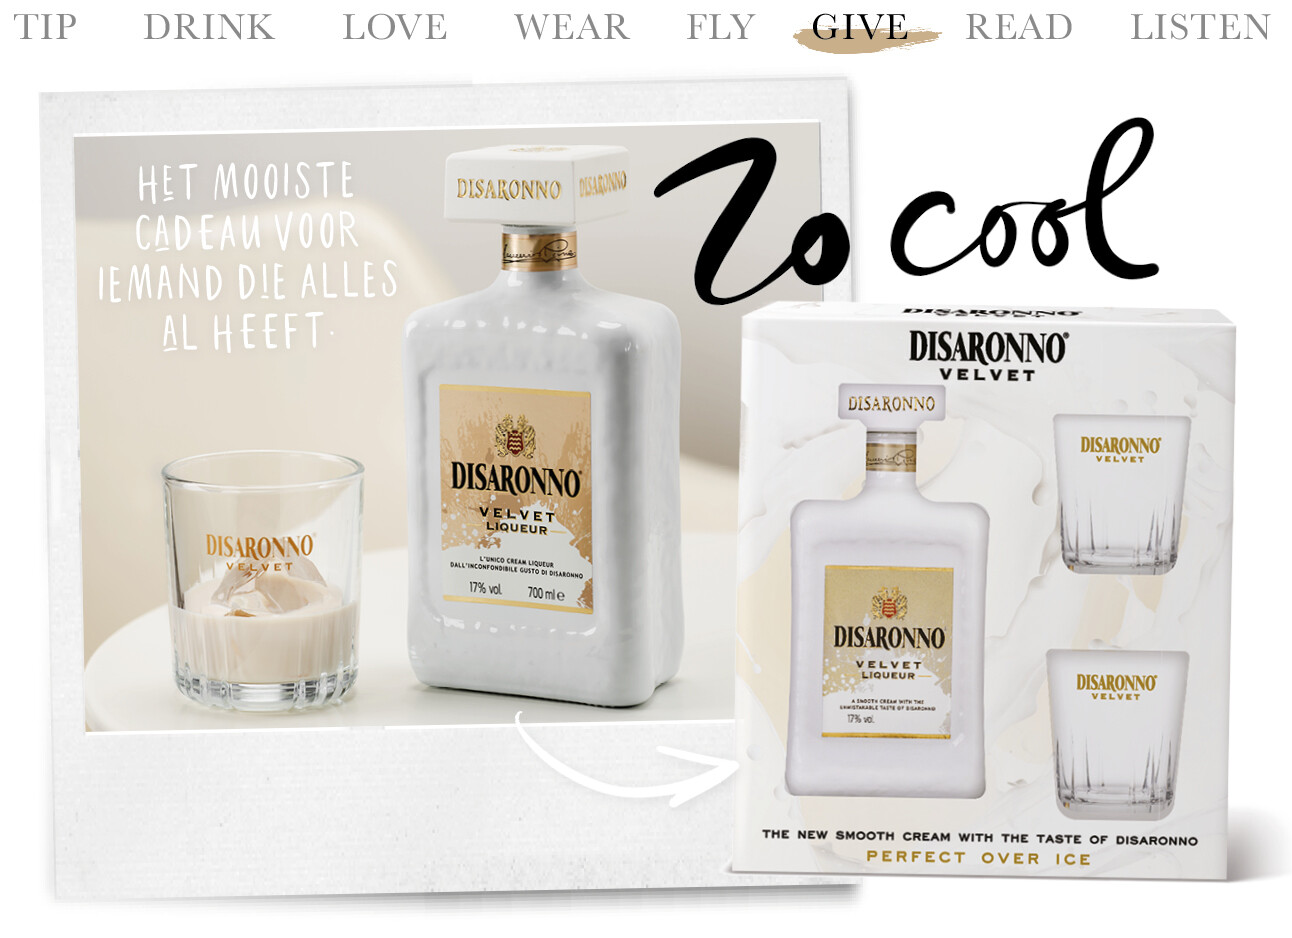 Today we give disaronno velvet giftpack